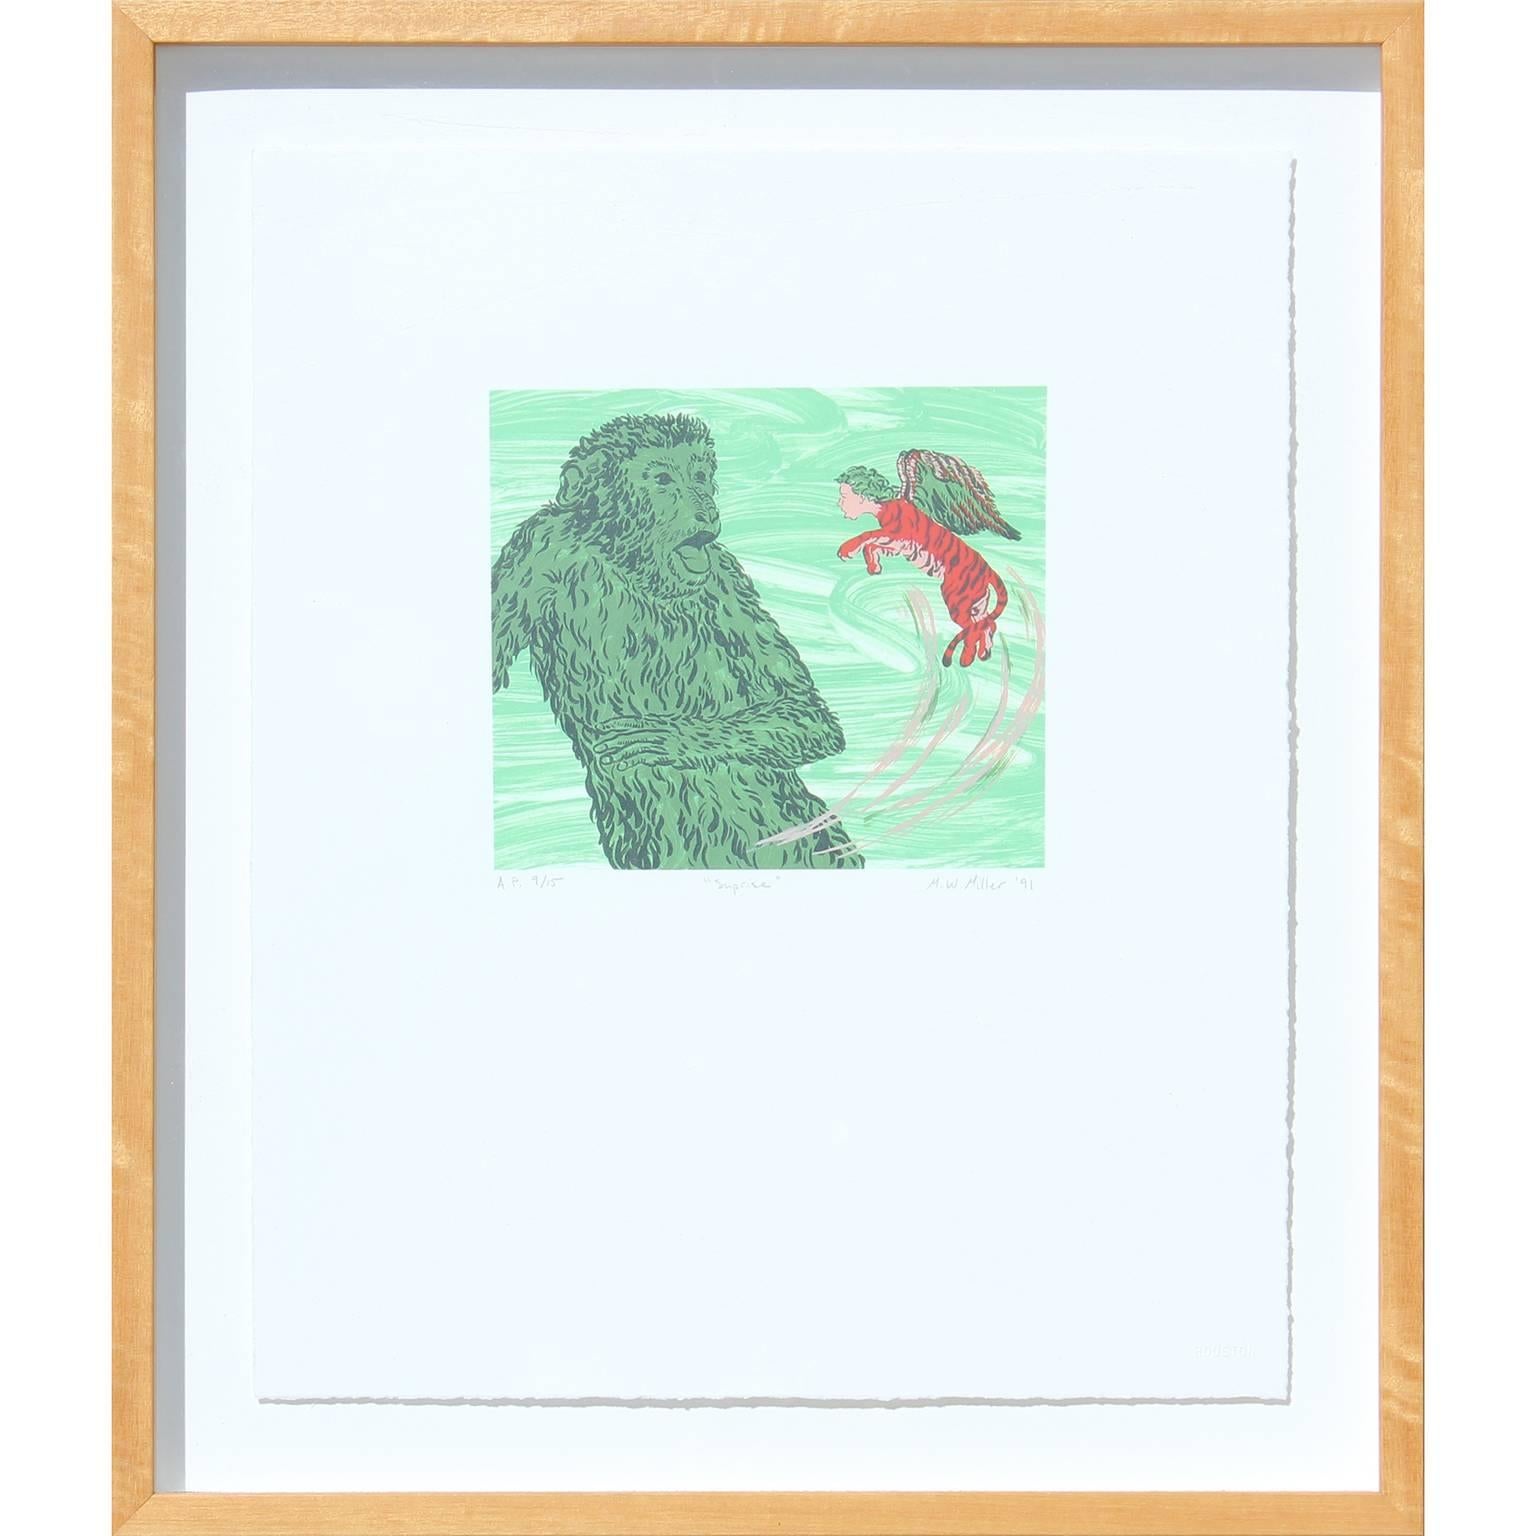 Melissa Miller Print - "Surprise" Abstract Animal Lithograph